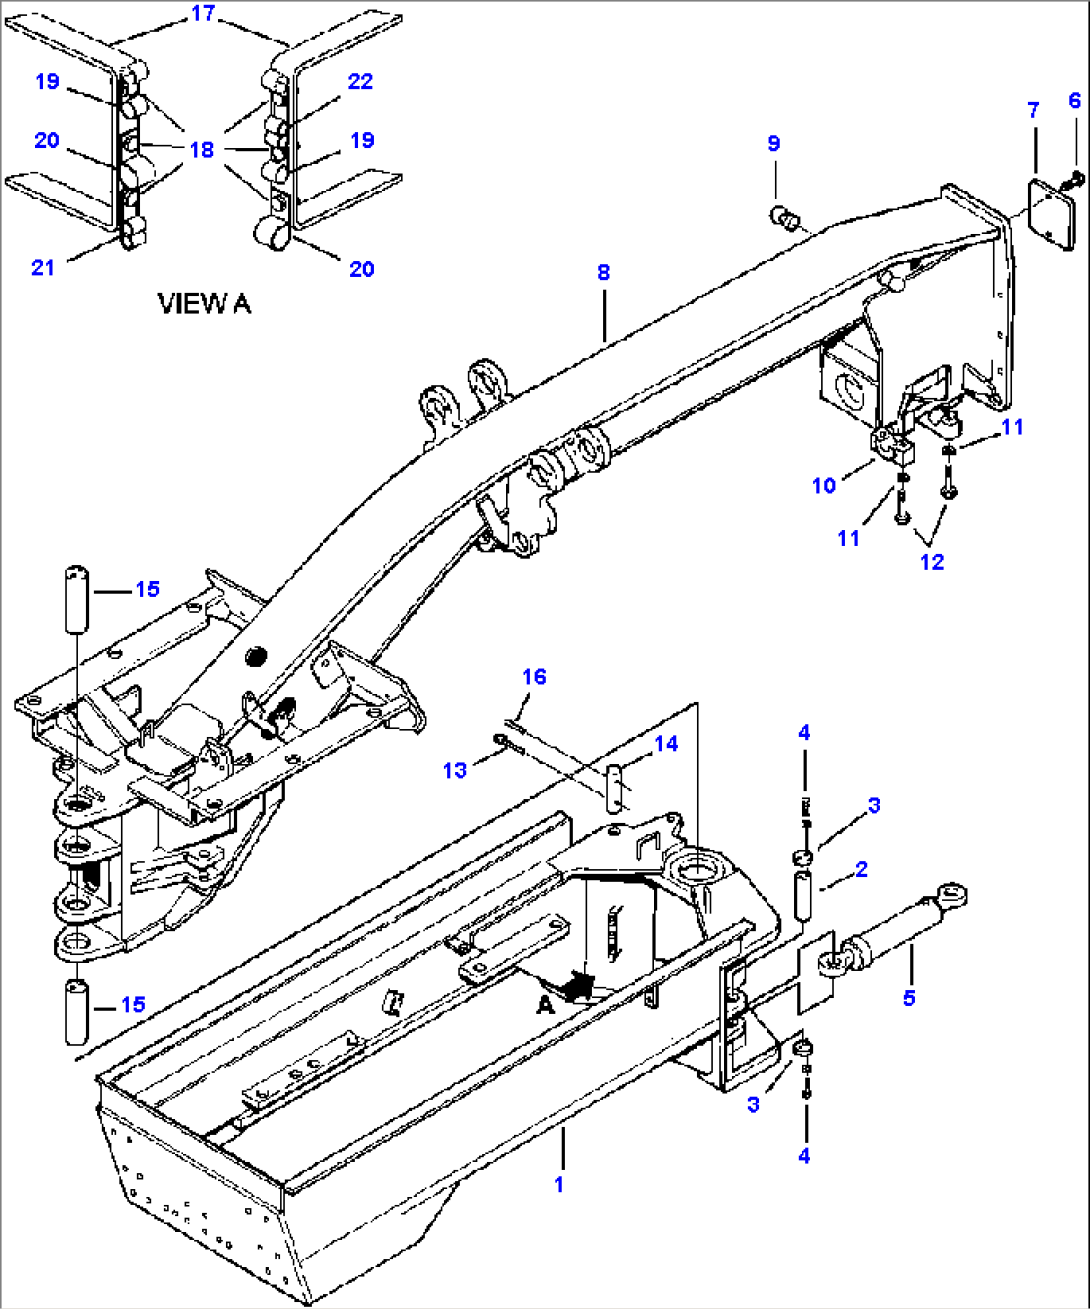 MAIN FRAME 530 2C - R.H. AND L.H. 90 DEGREES BLADE SUSPENSION - S/N 203959 AND UP